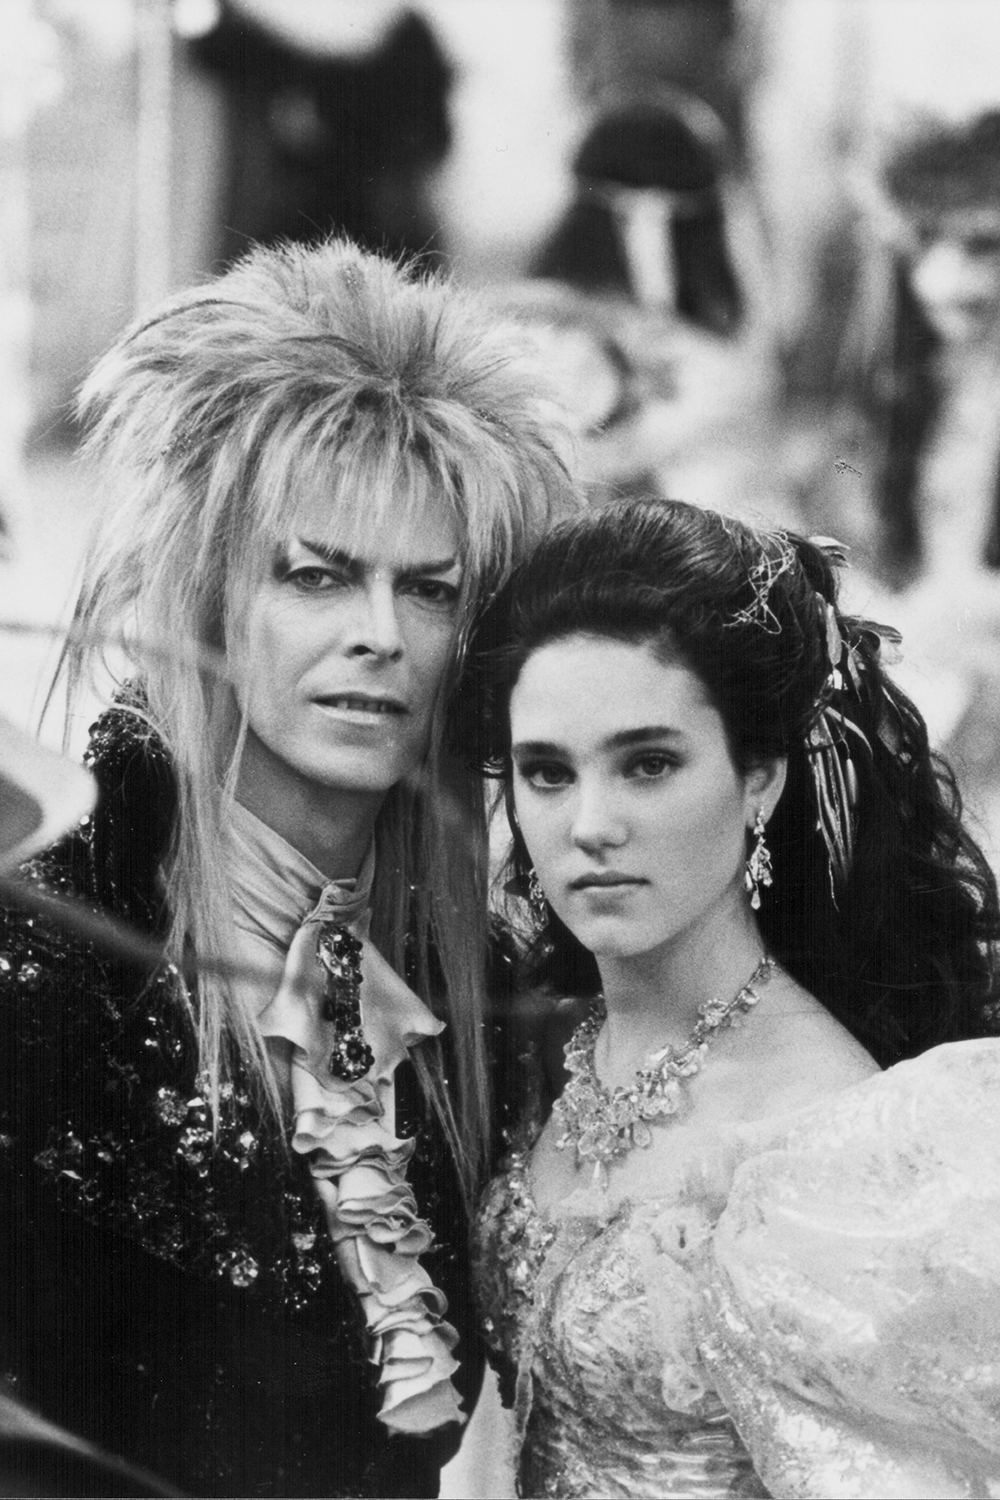 David Bowie and Jennifer Connelly in cult 80's classic film, Labyrinth.